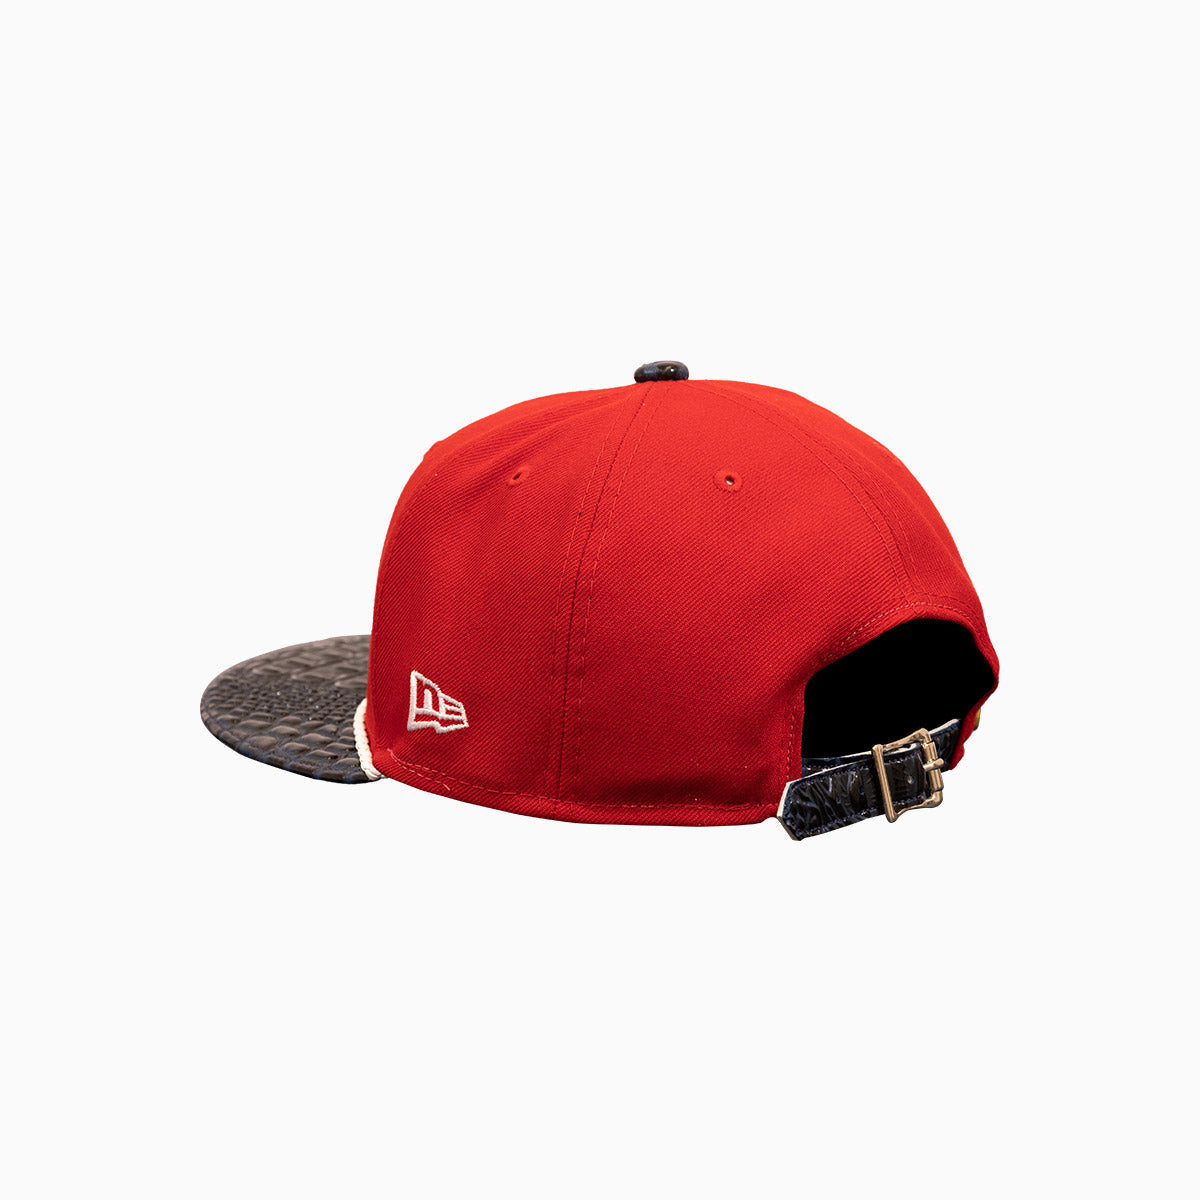 breyers-buck-50-st-louis-cardinals-hat-with-leather-visor-breyers-tst-lch-red-brown